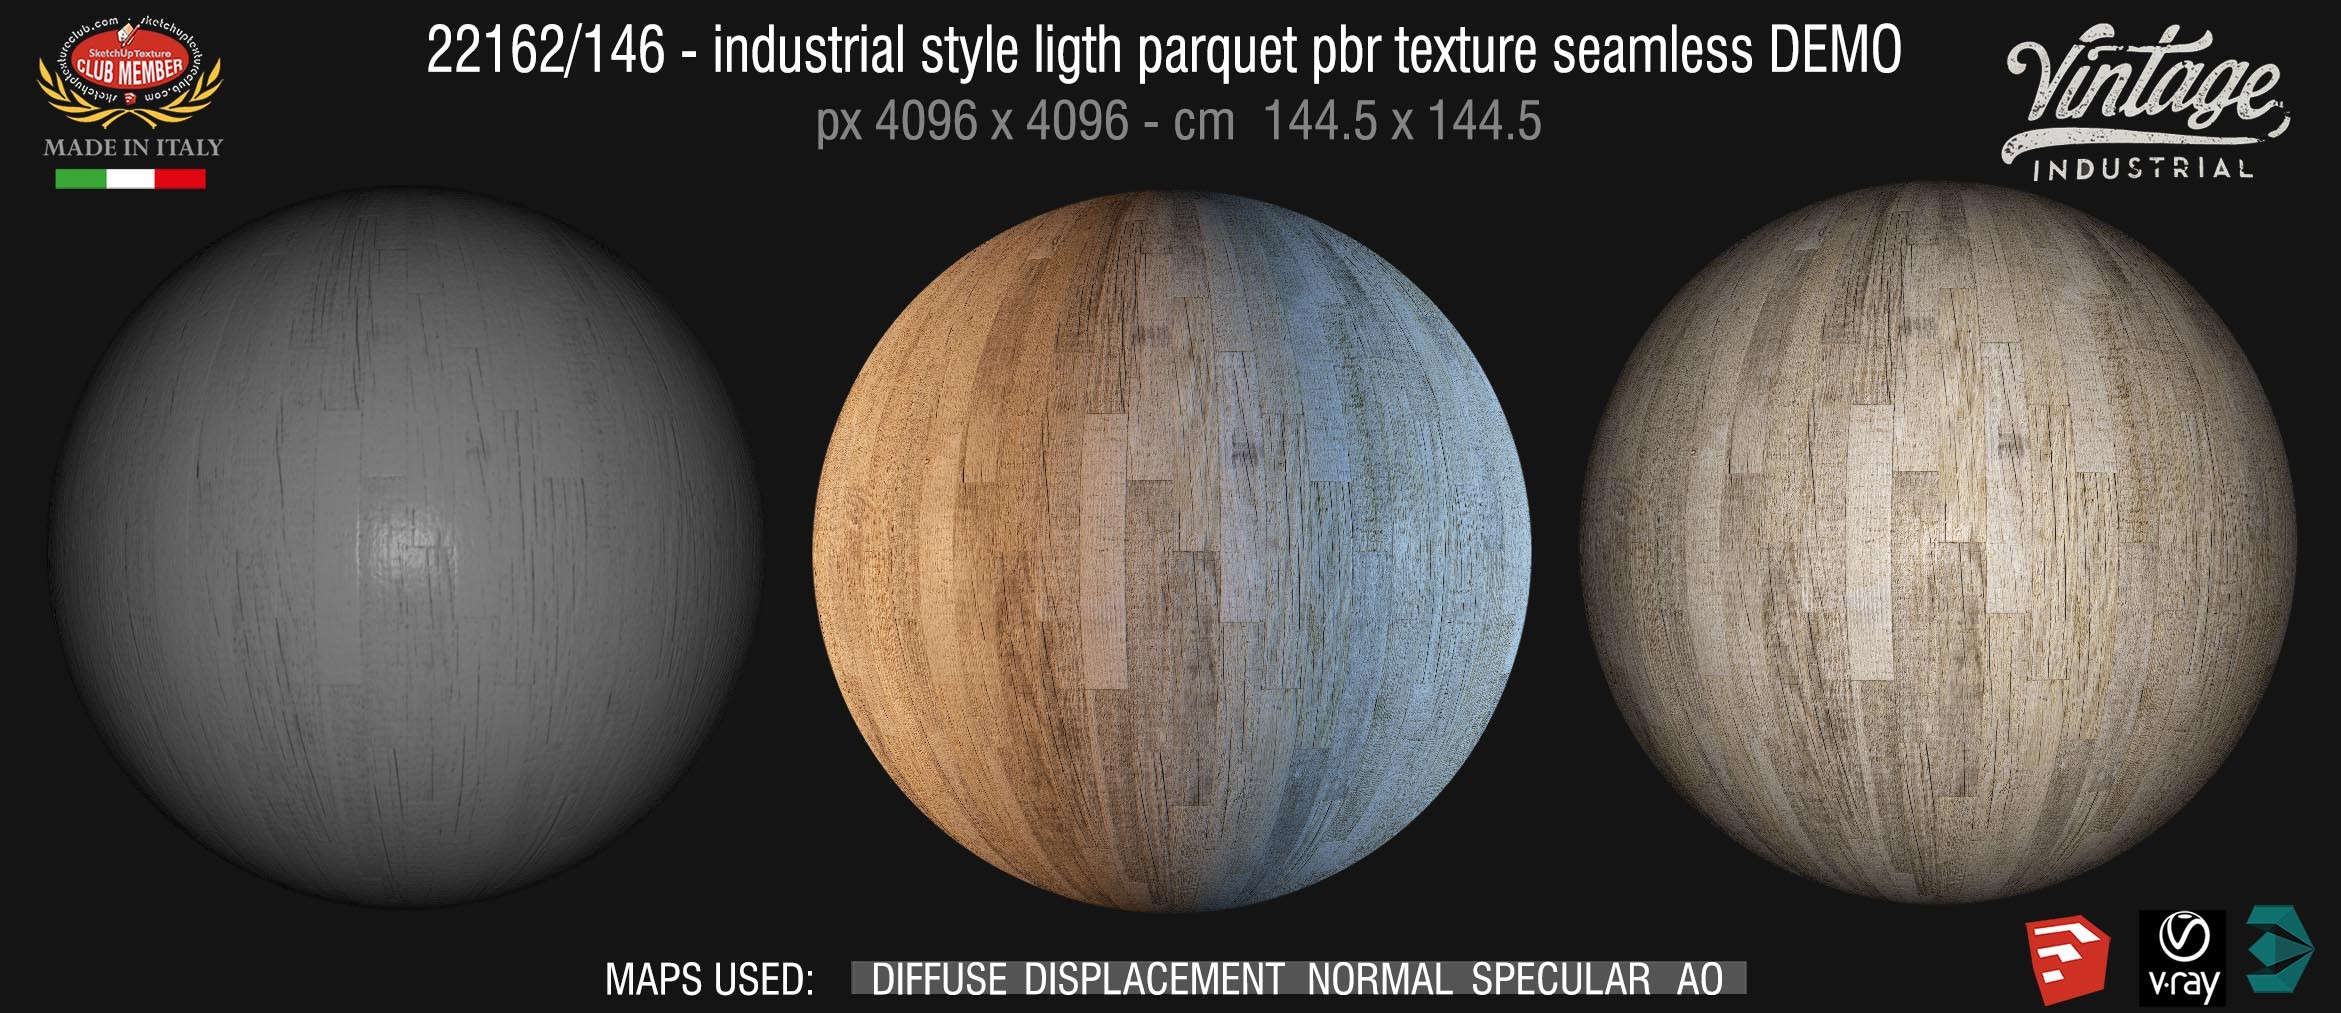 22162/146 industrial style ligth parquet pbr texture seamless DEMO